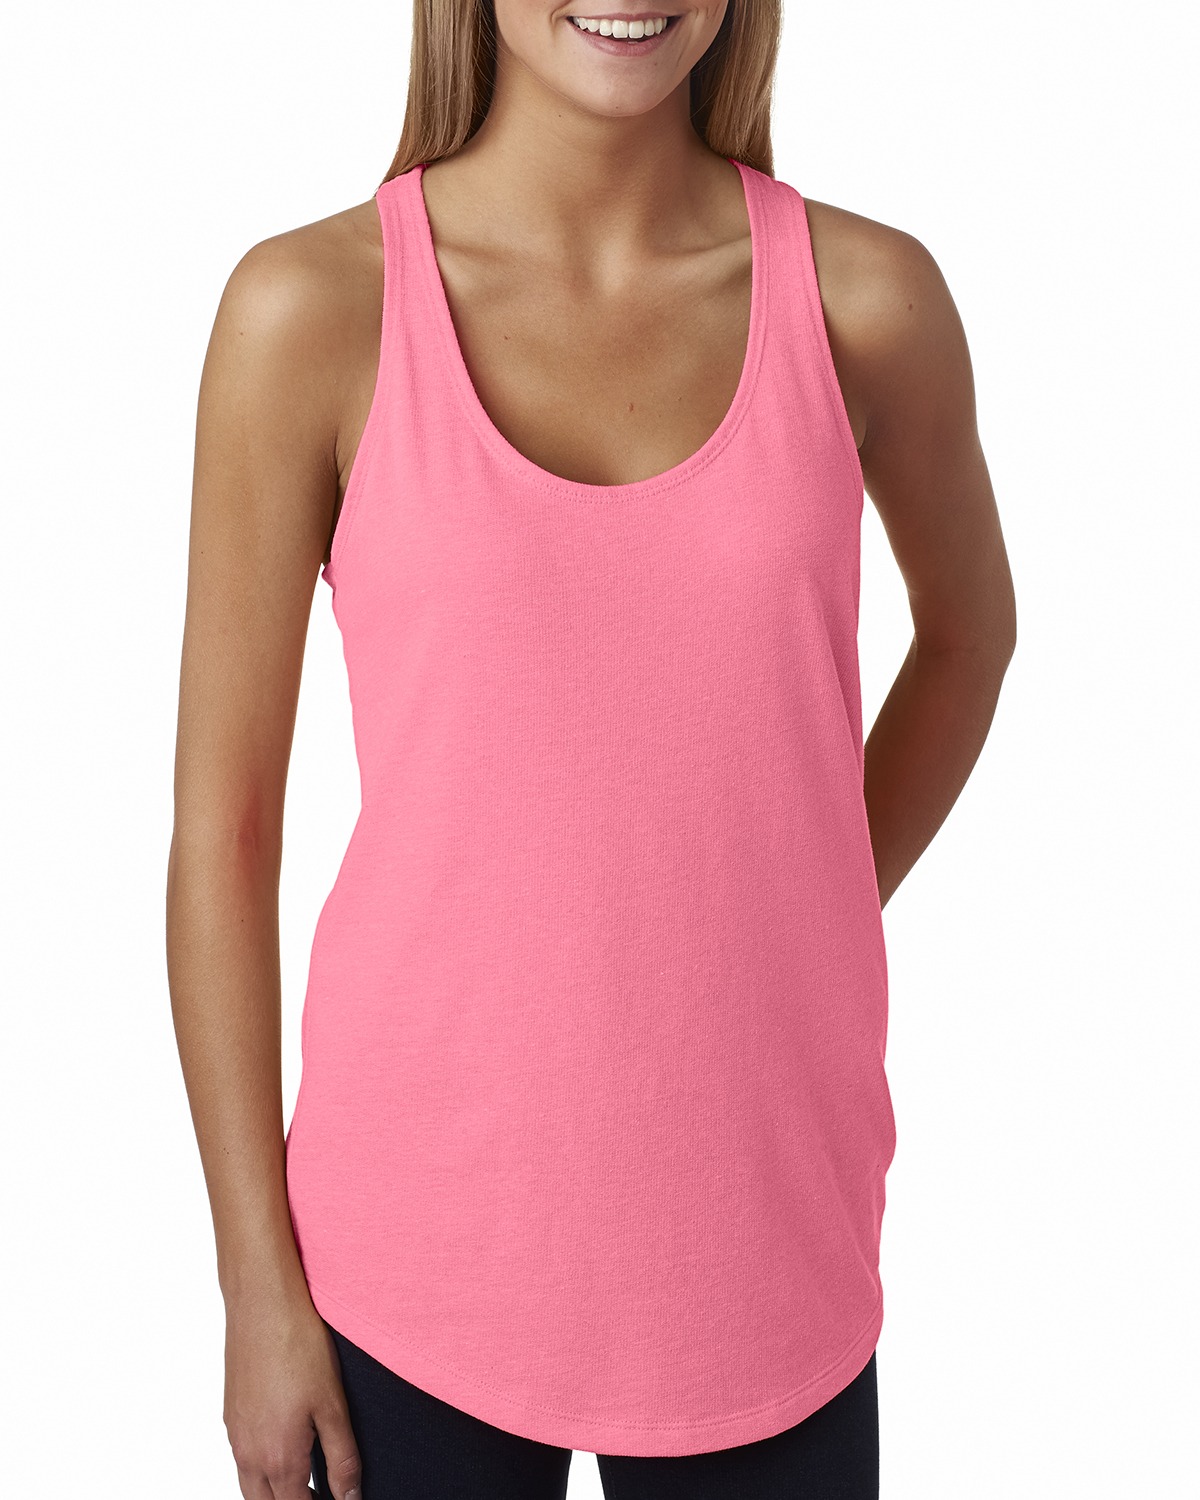 click to view Neon Heather Pink